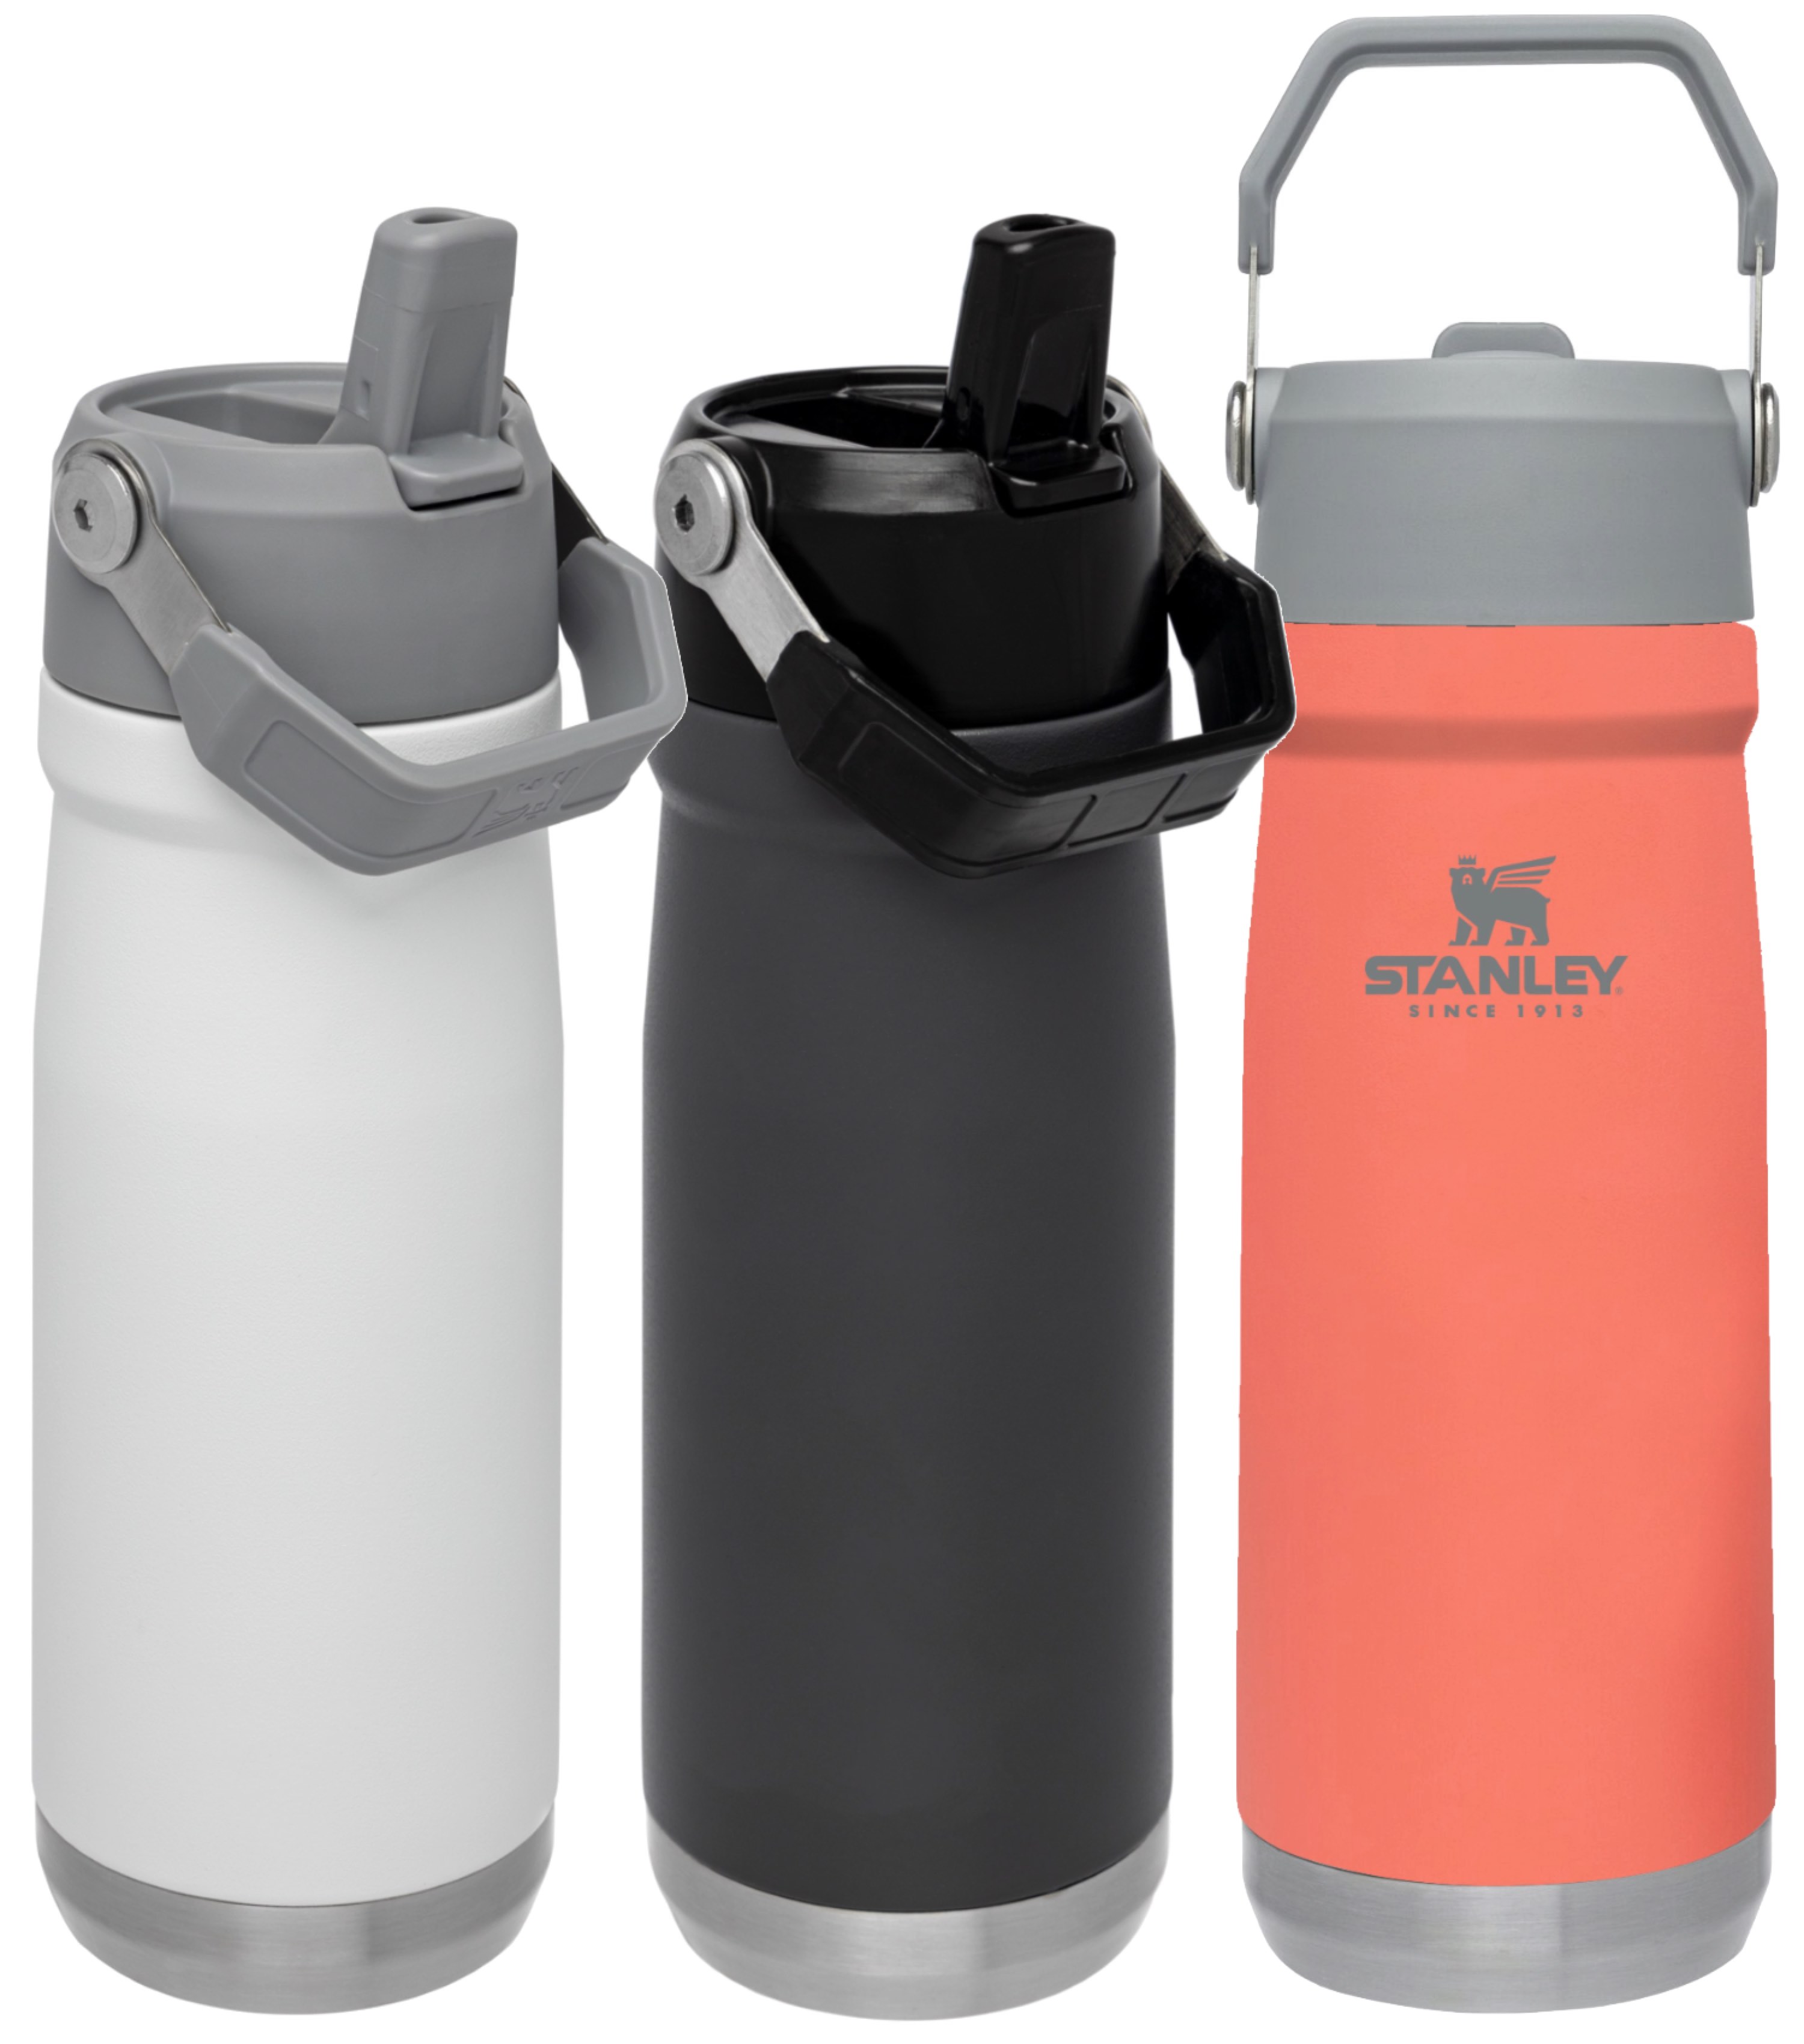 http://www.traveluniverse.com.au/Shared/Images/Product/Stanley-The-IceFlow-650ml-Flip-Straw-Water-Bottle/88723-group.jpg